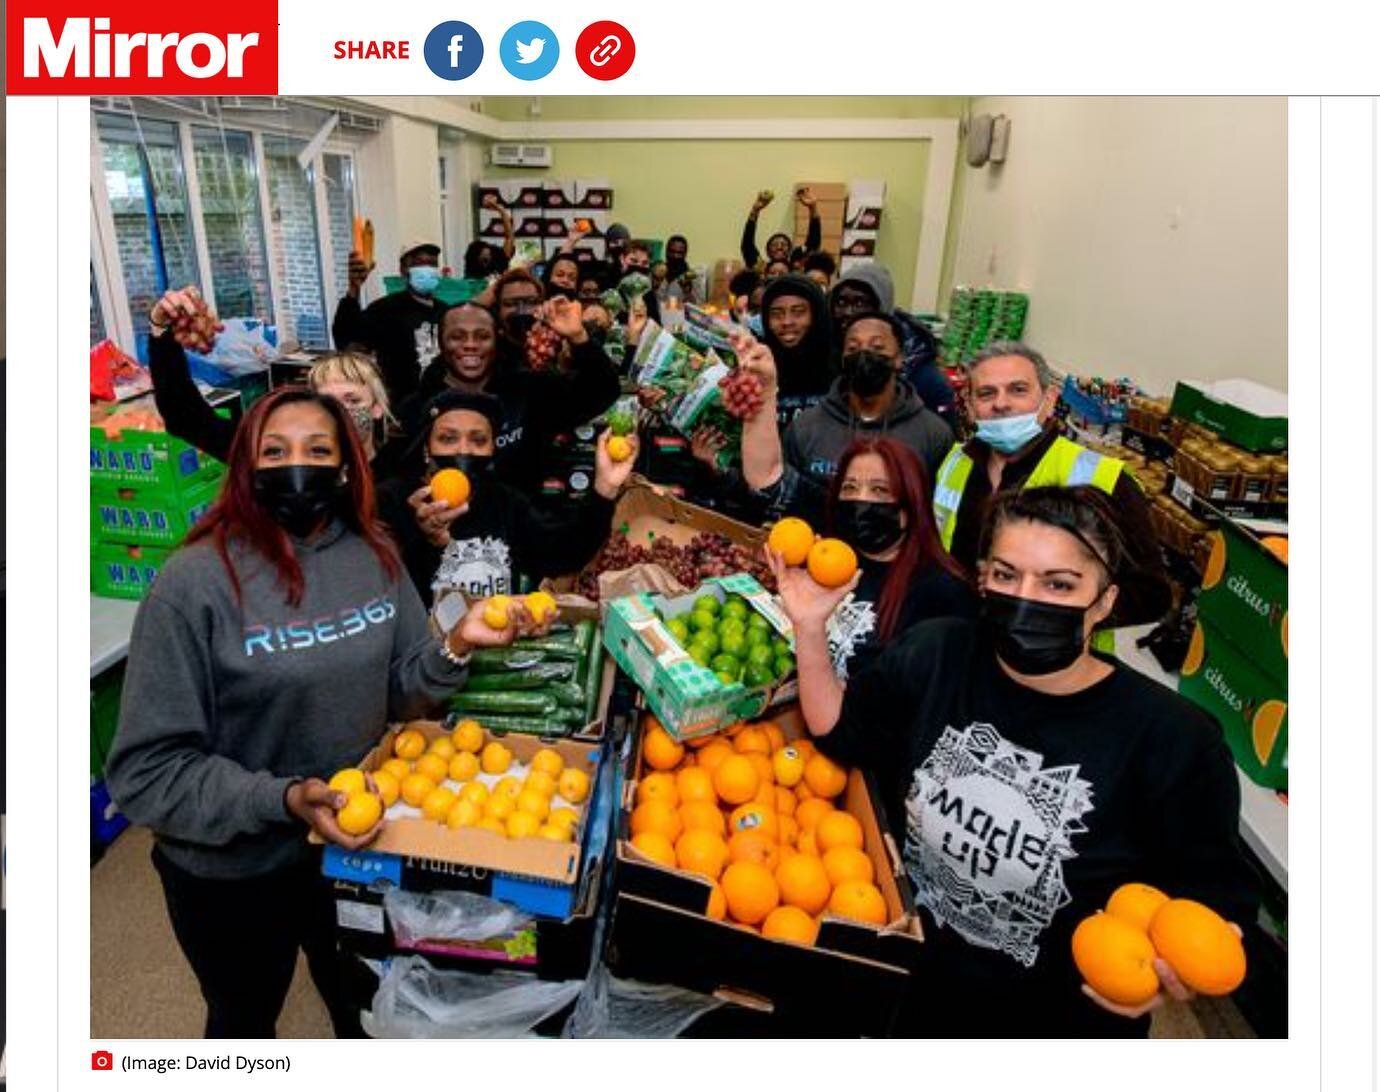 Much love to @dailymirror for celebrating our work creating the Kingsmead Community Shop, and the amazing growth of our partner organisation @rise.365 leading the youth in showcasing their majesty. To date we have created 30,000 culturally appropriat